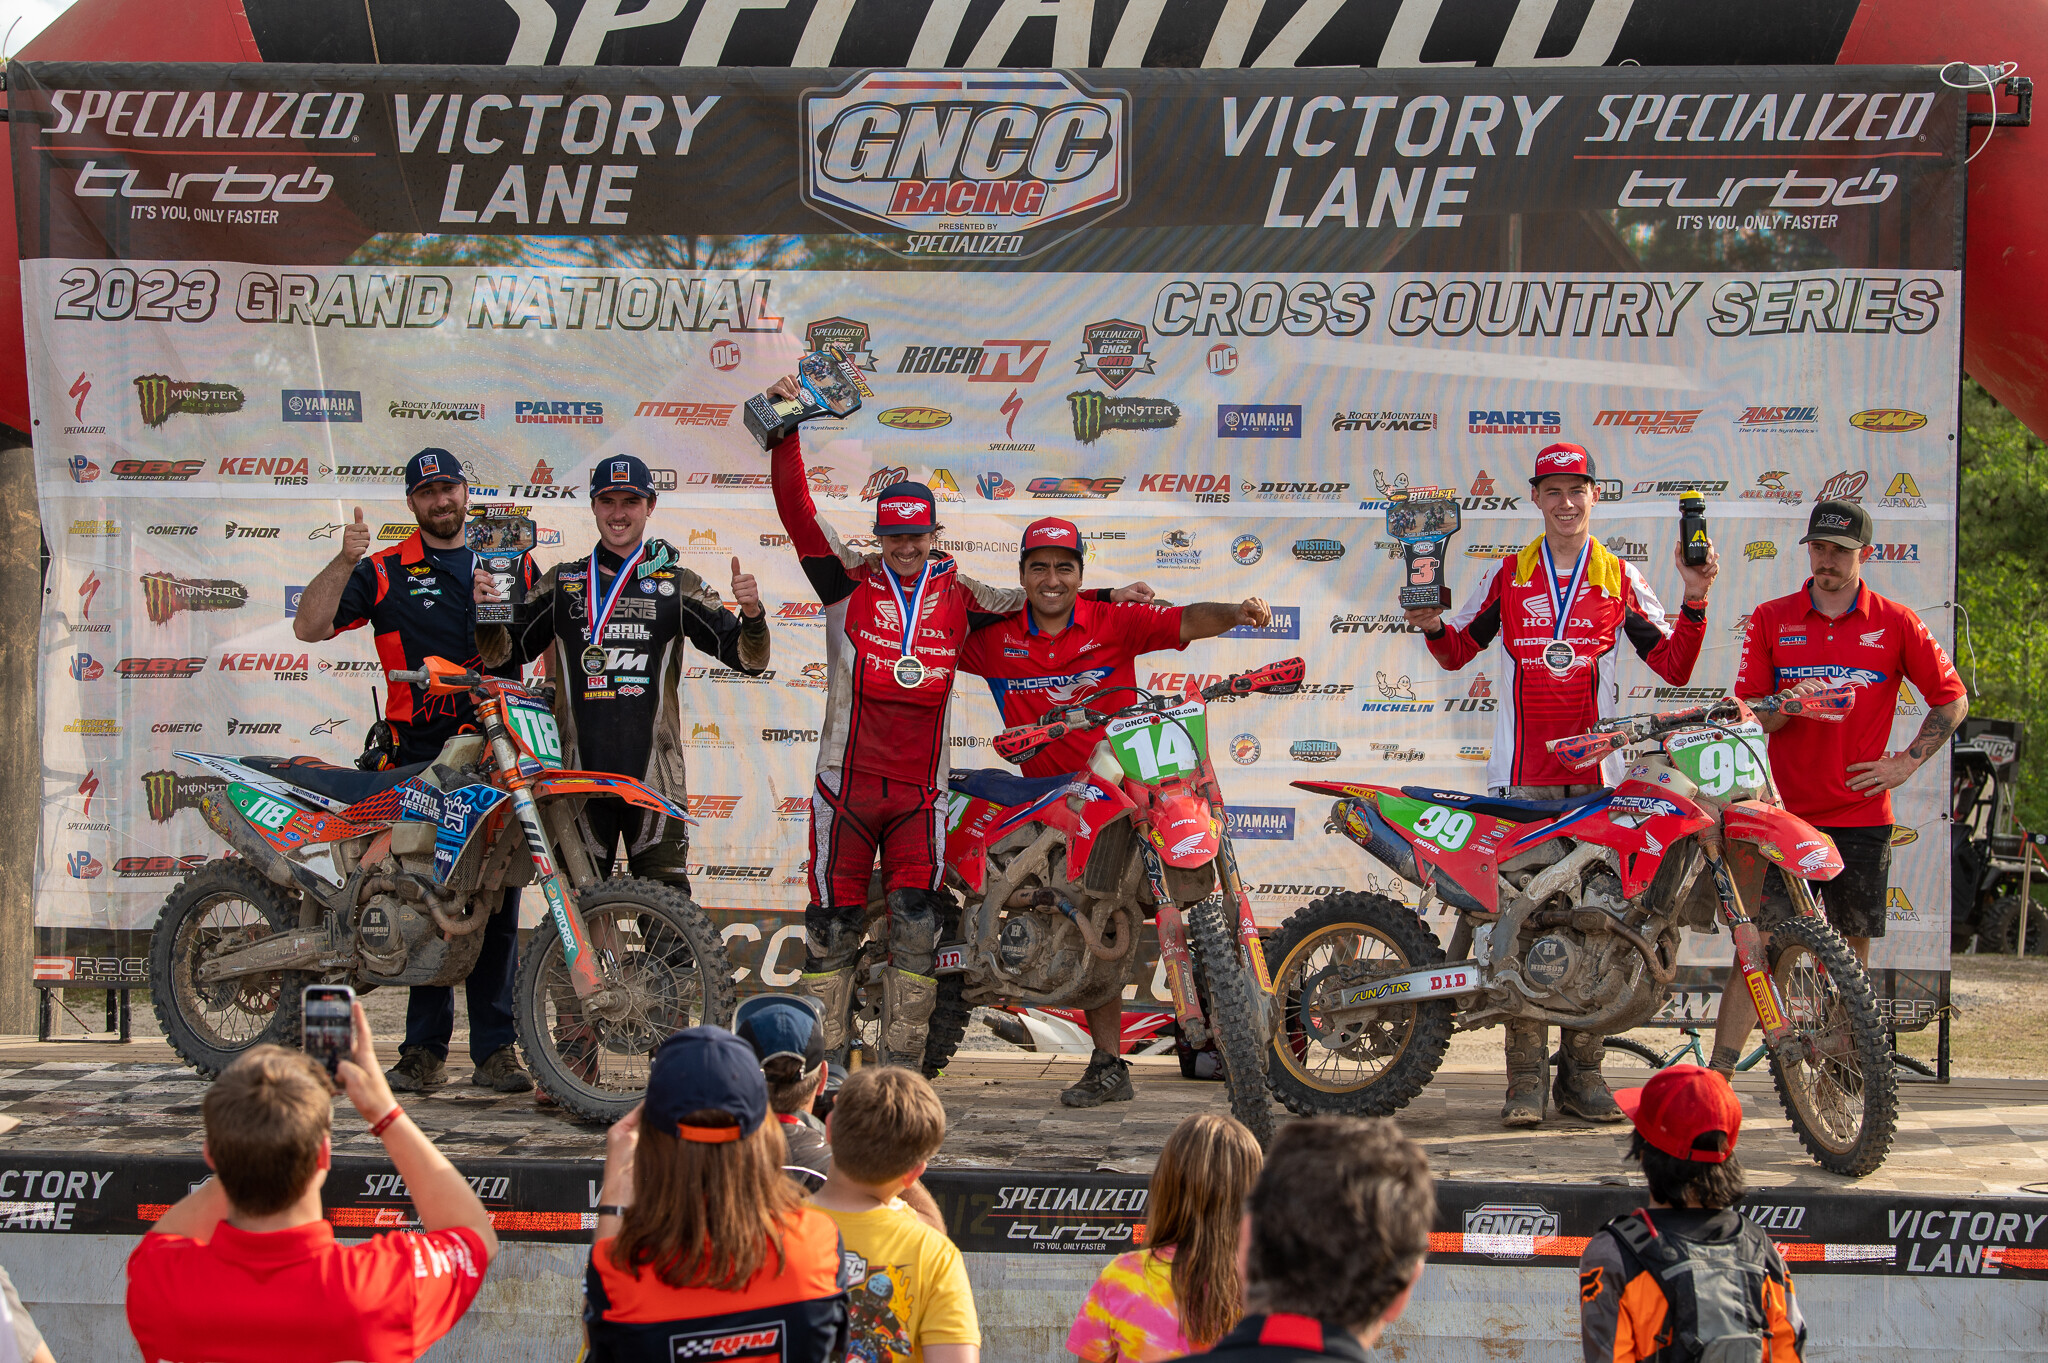 Ruy Barbosa (center), Mason Semmens (left) and Cody Barnes (right) rounded out the XC2 250 Pro class podium.